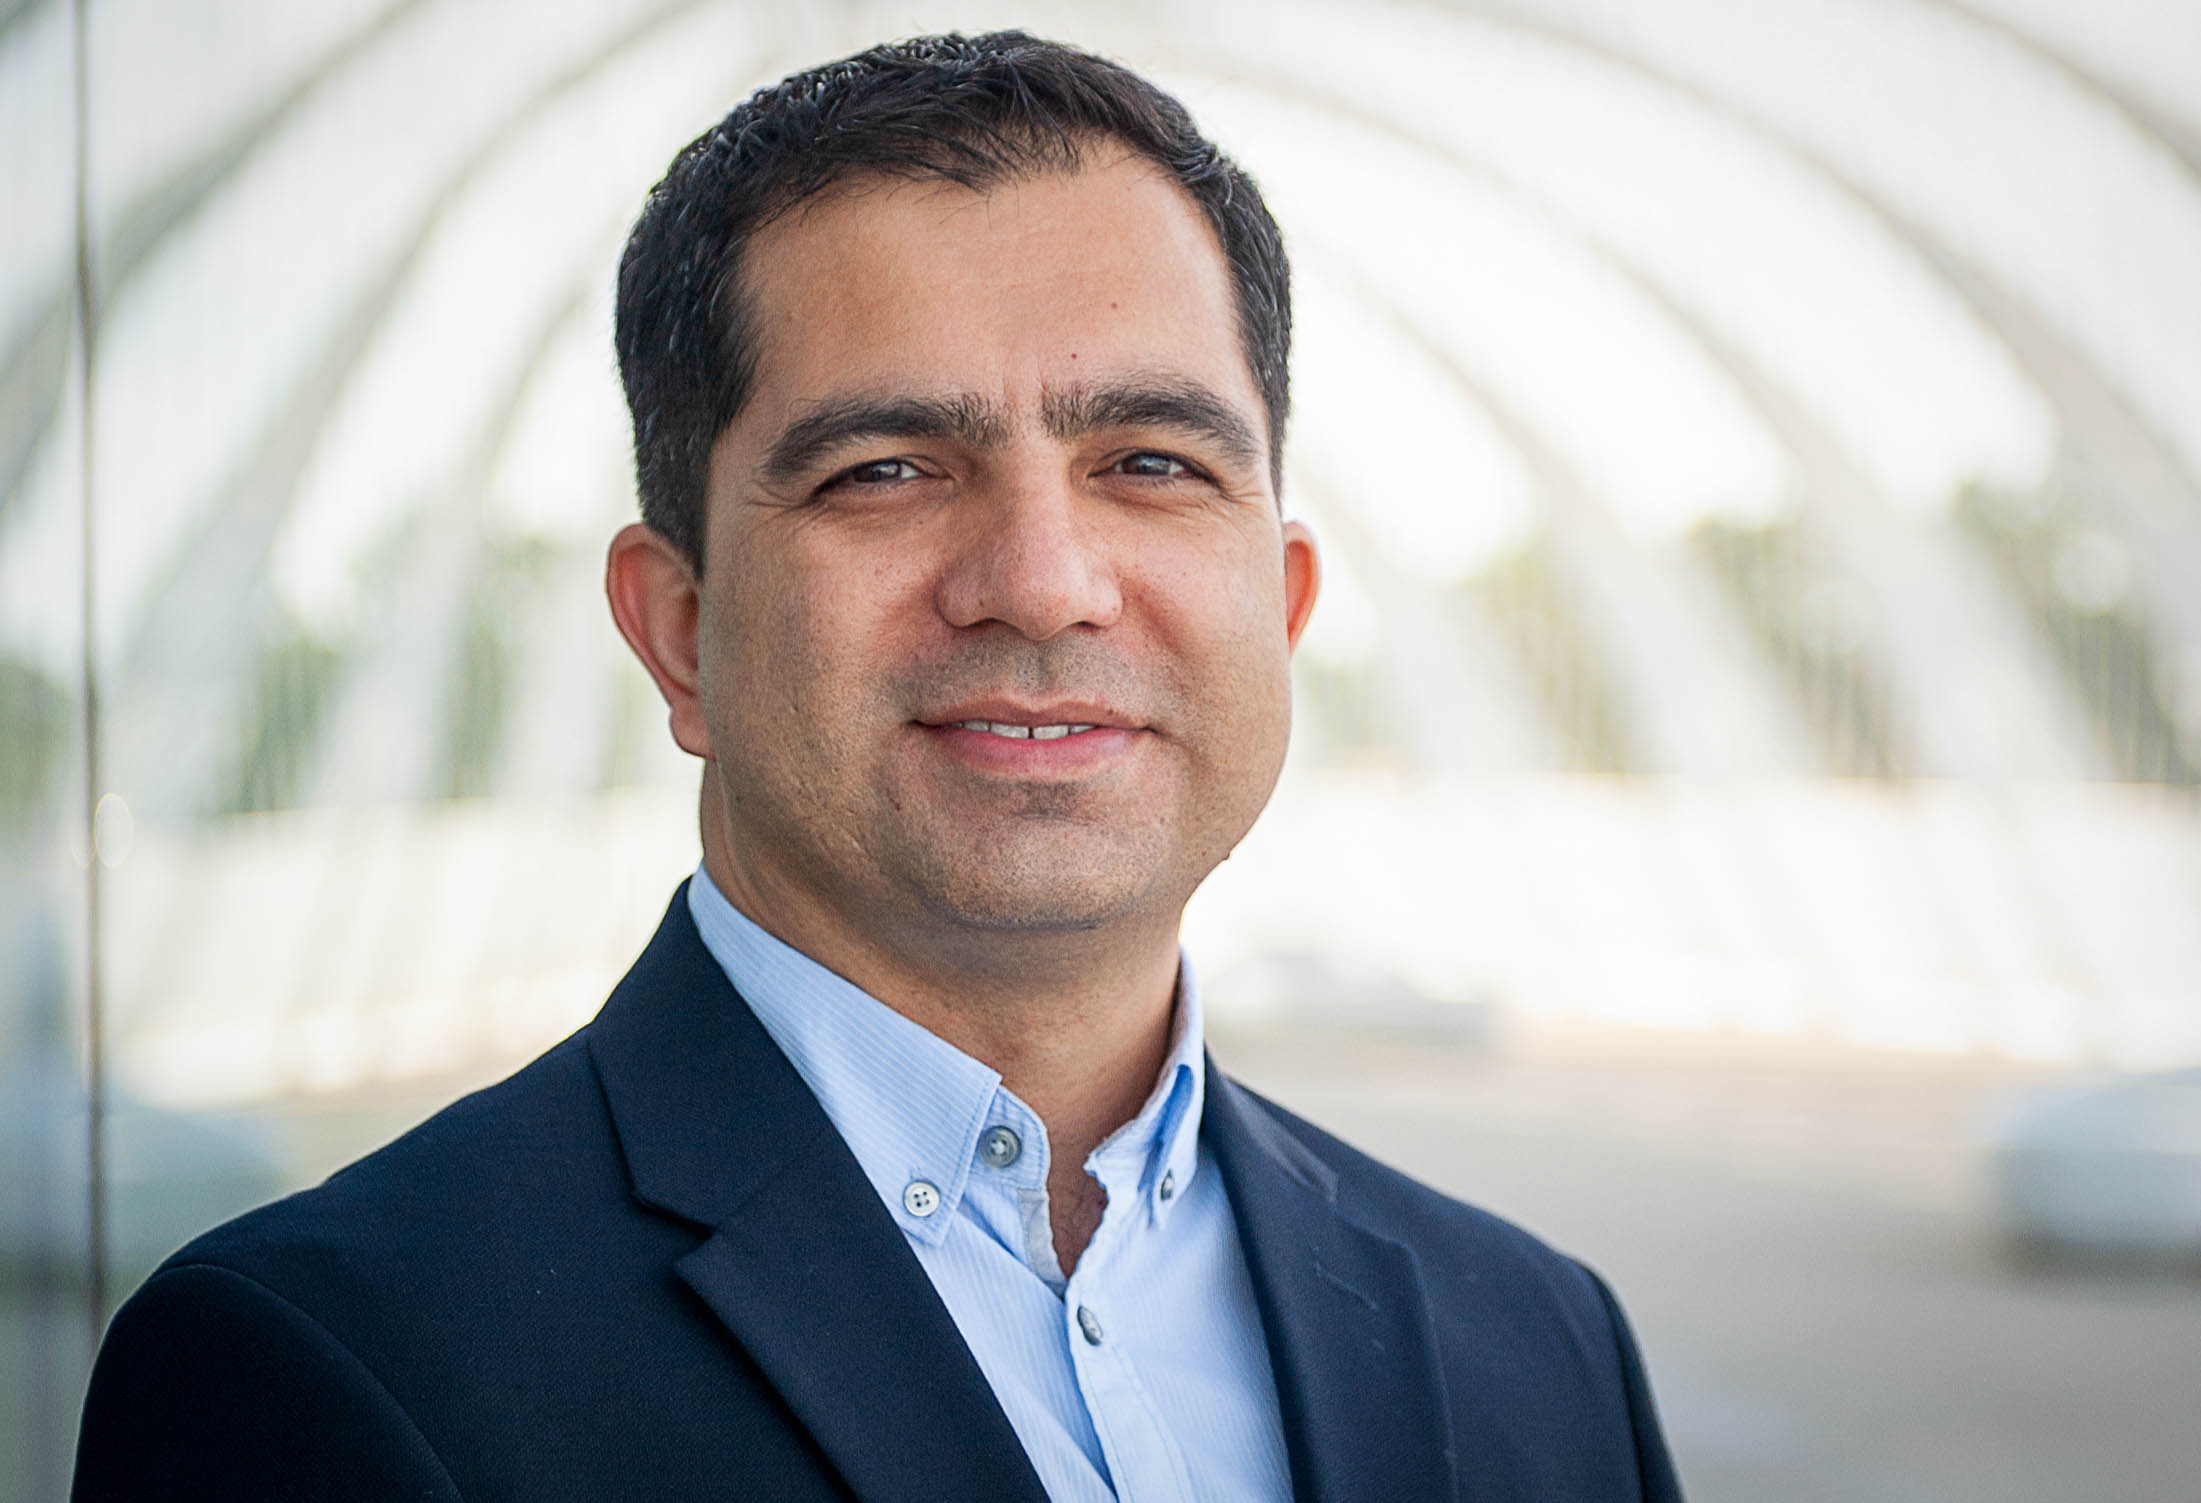 Dr. Oguzhan Topsakal is assistant professor of computer science at Florida Poly